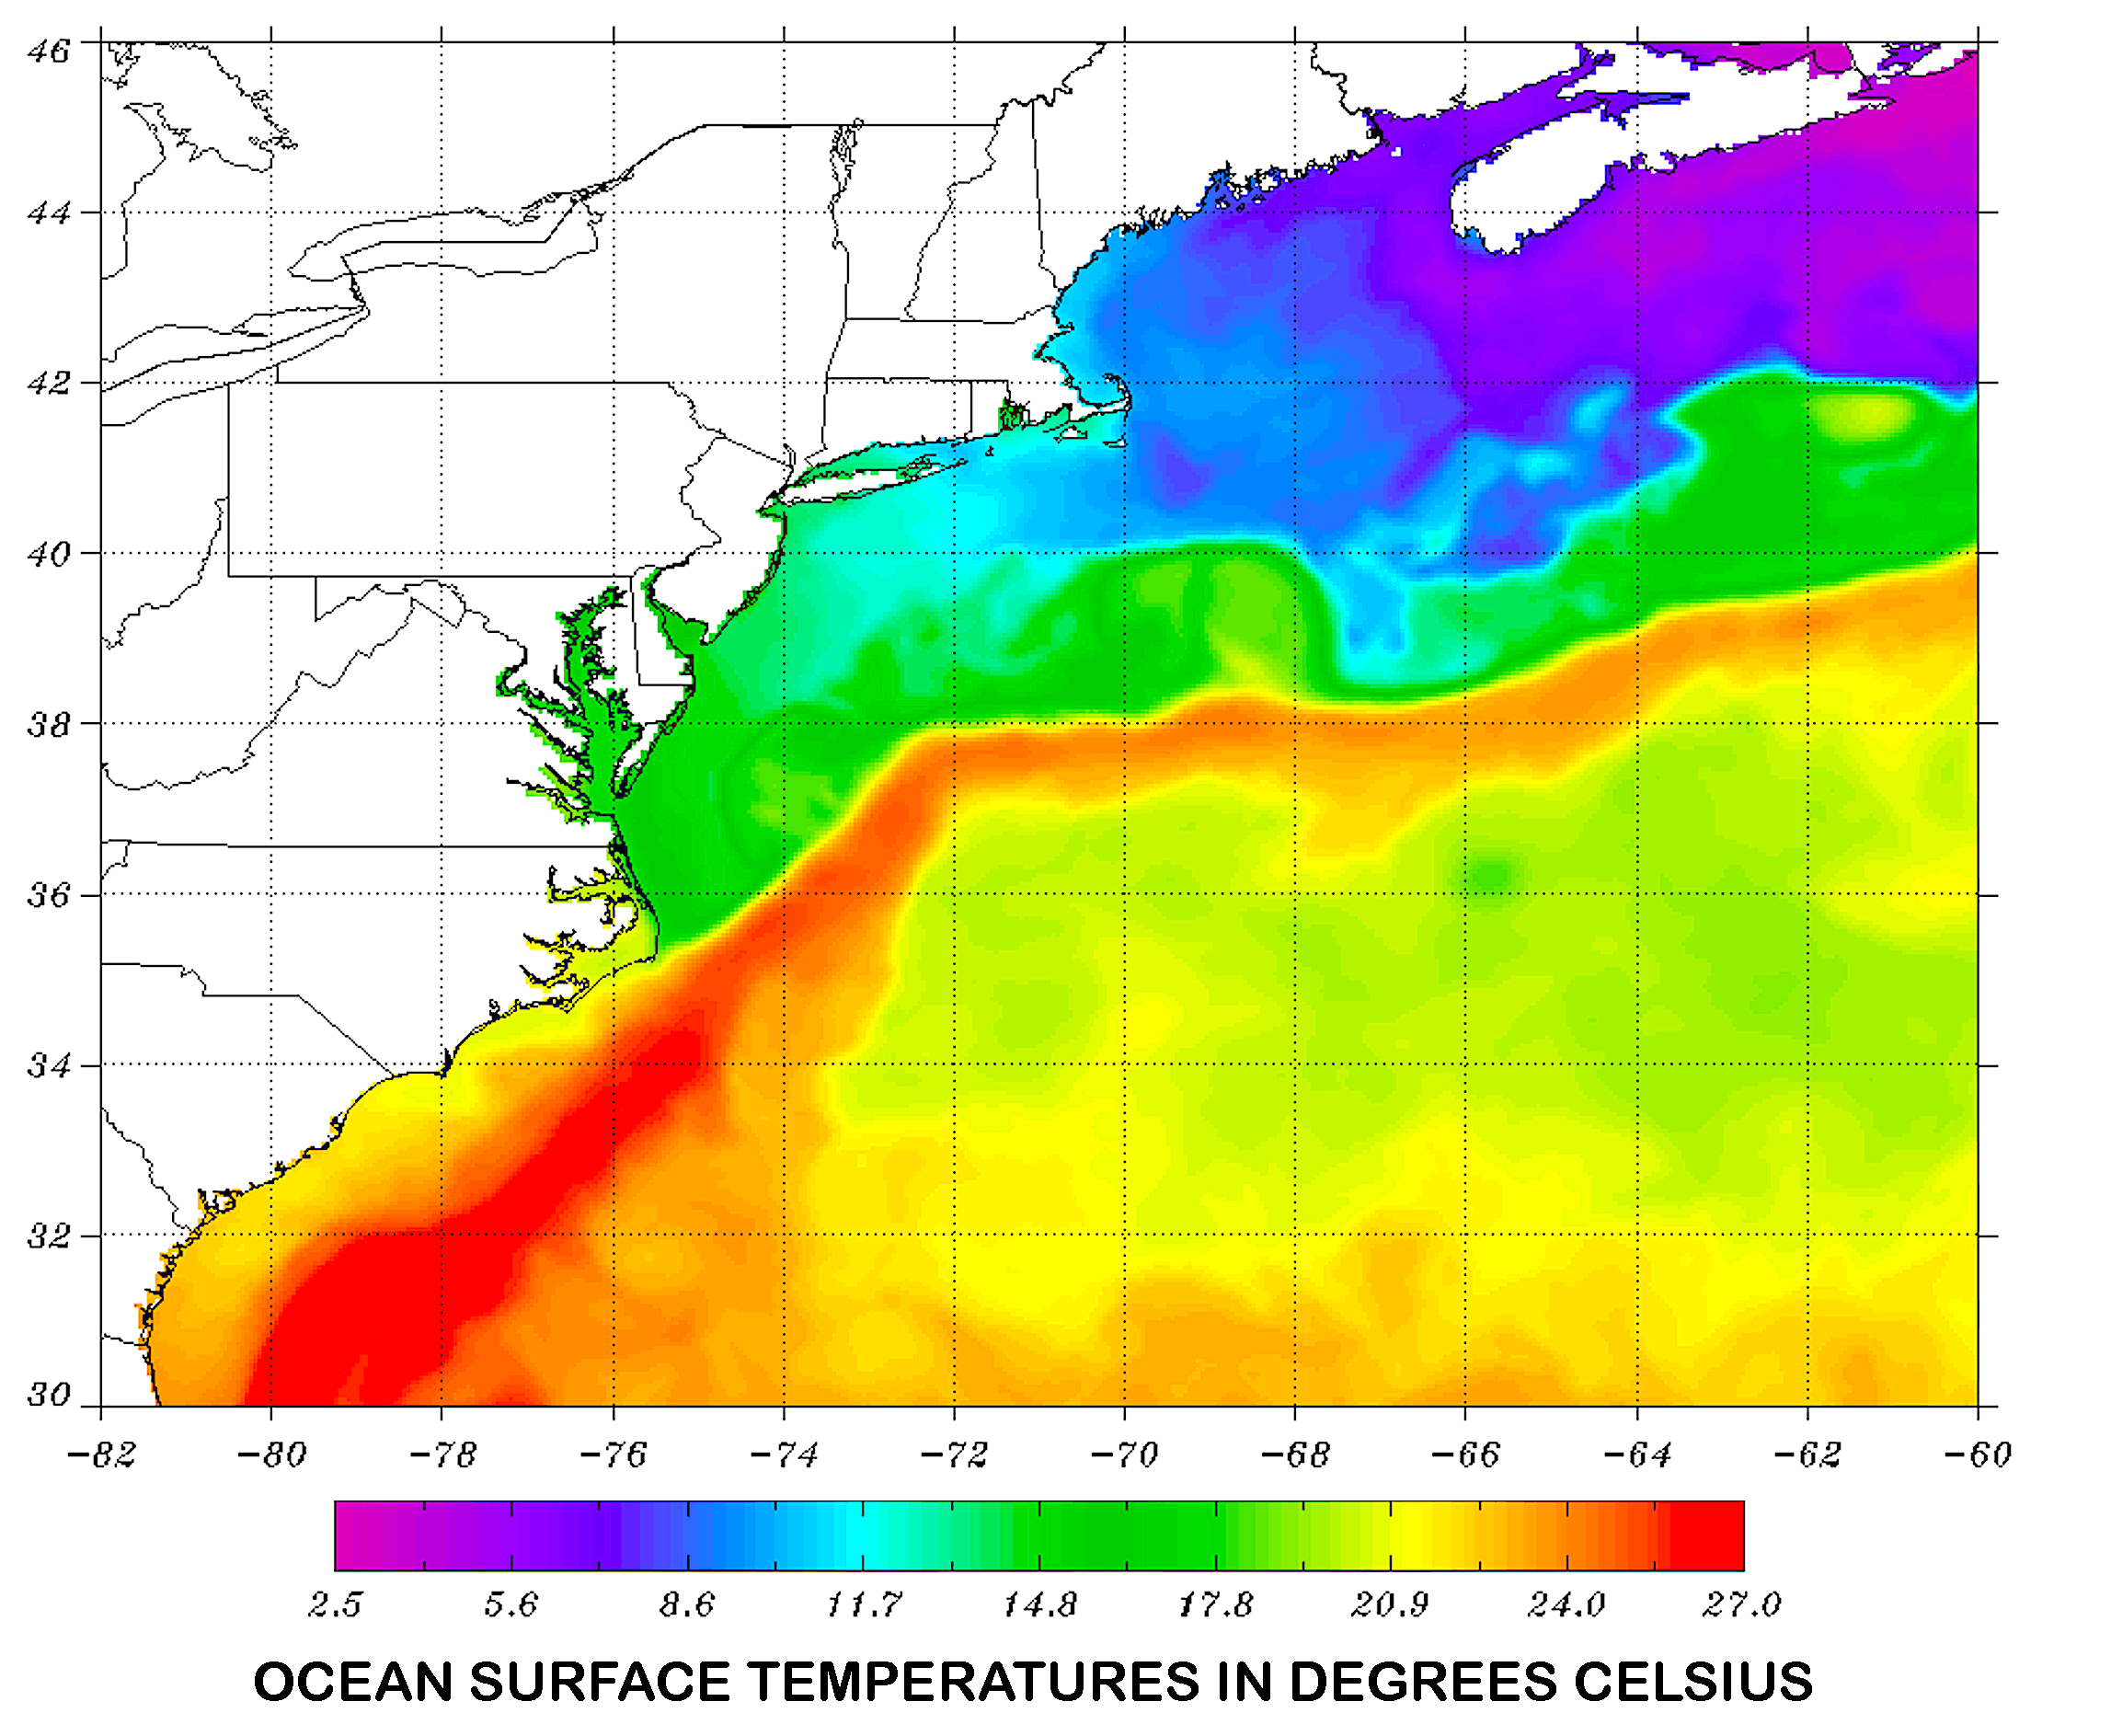 map: NOAA/NESDIS Geo-Polar Blended 5 km. 55T Analysis for the North Atlantic (ocean surface temperatures).